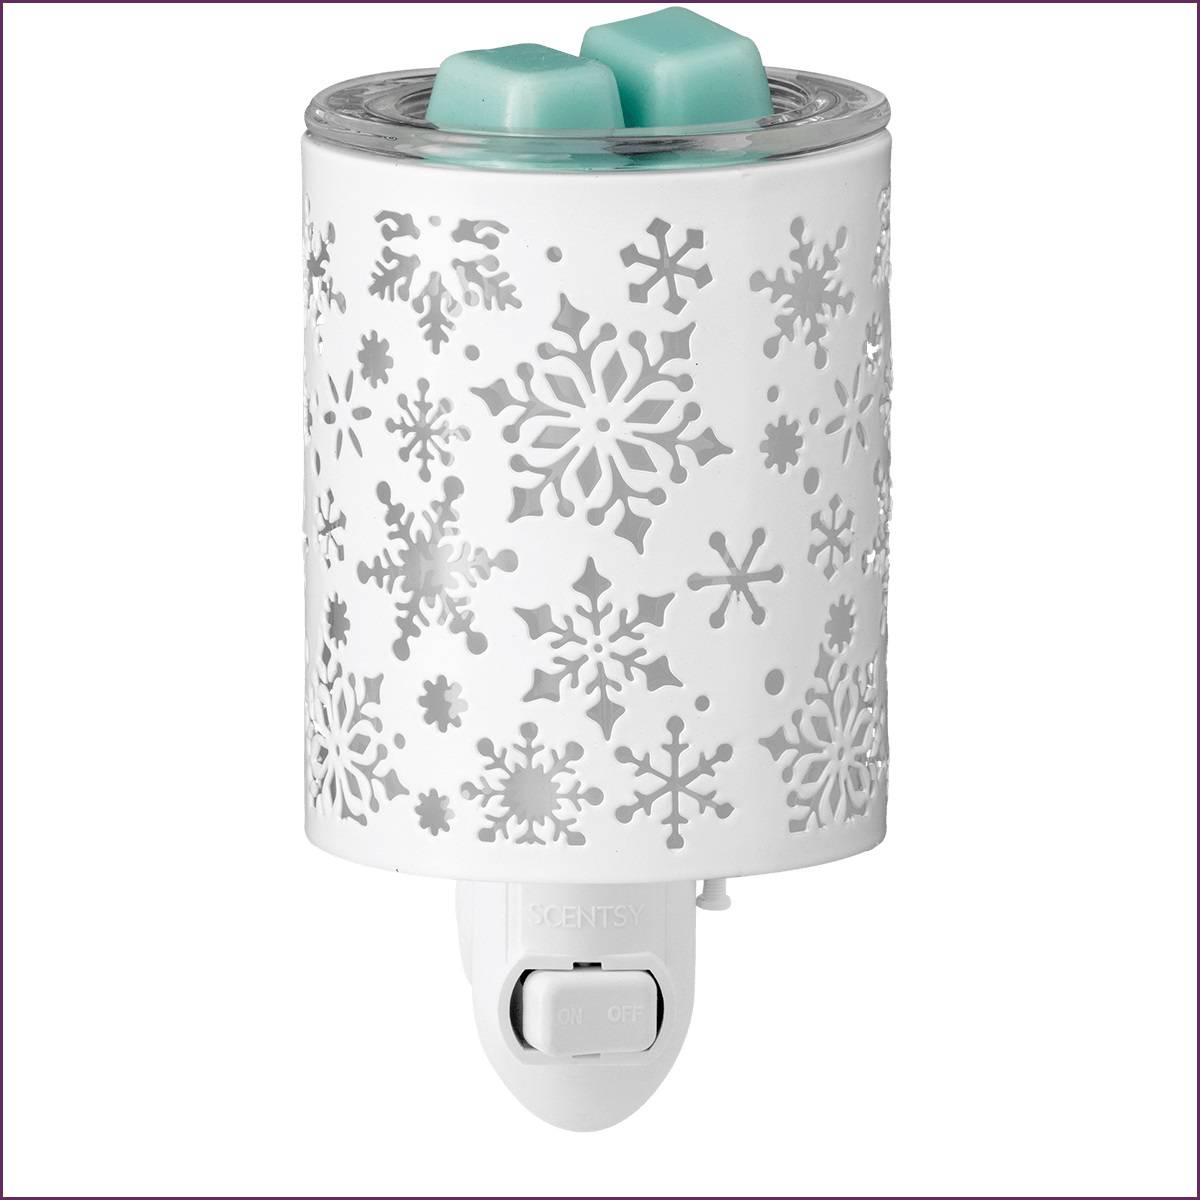 Catching Snowflakes Scentsy Mini Warmer | Off With Wax